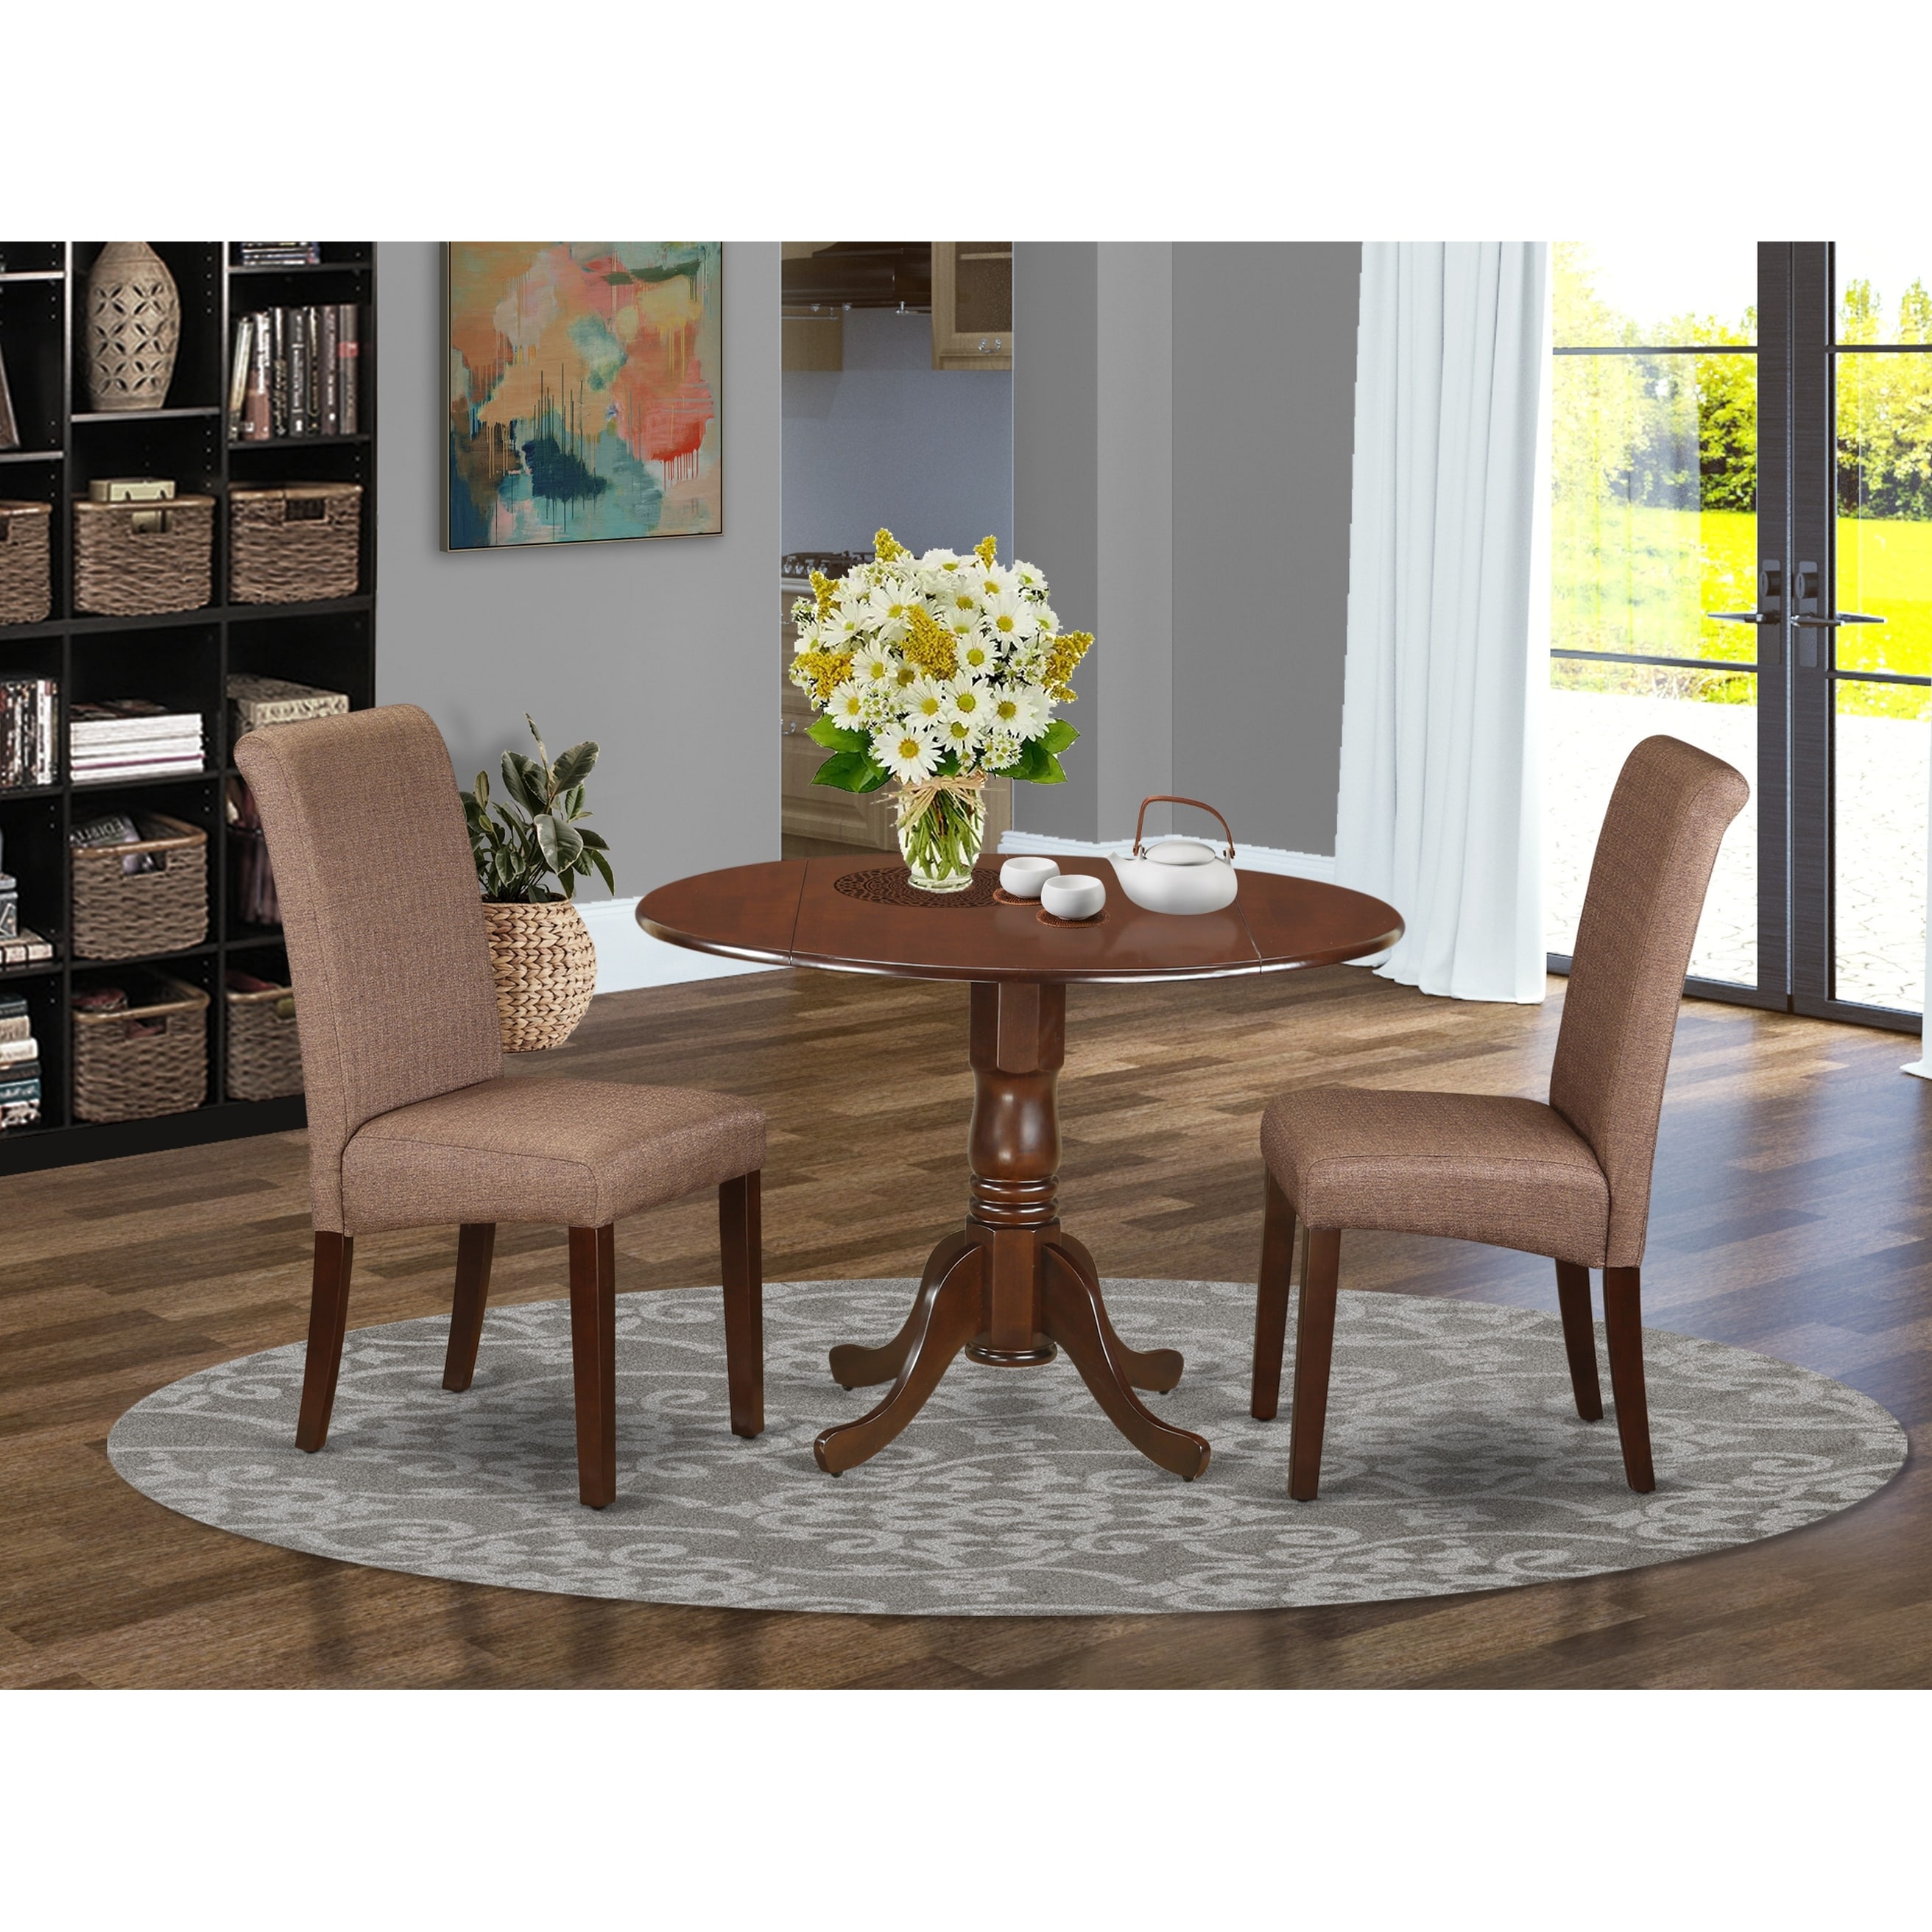 Shop Black Friday Deals On 3pc Small Round Kitchen Table With Elegant Parson Chairs Number Of Chair Option Overstock 27864825